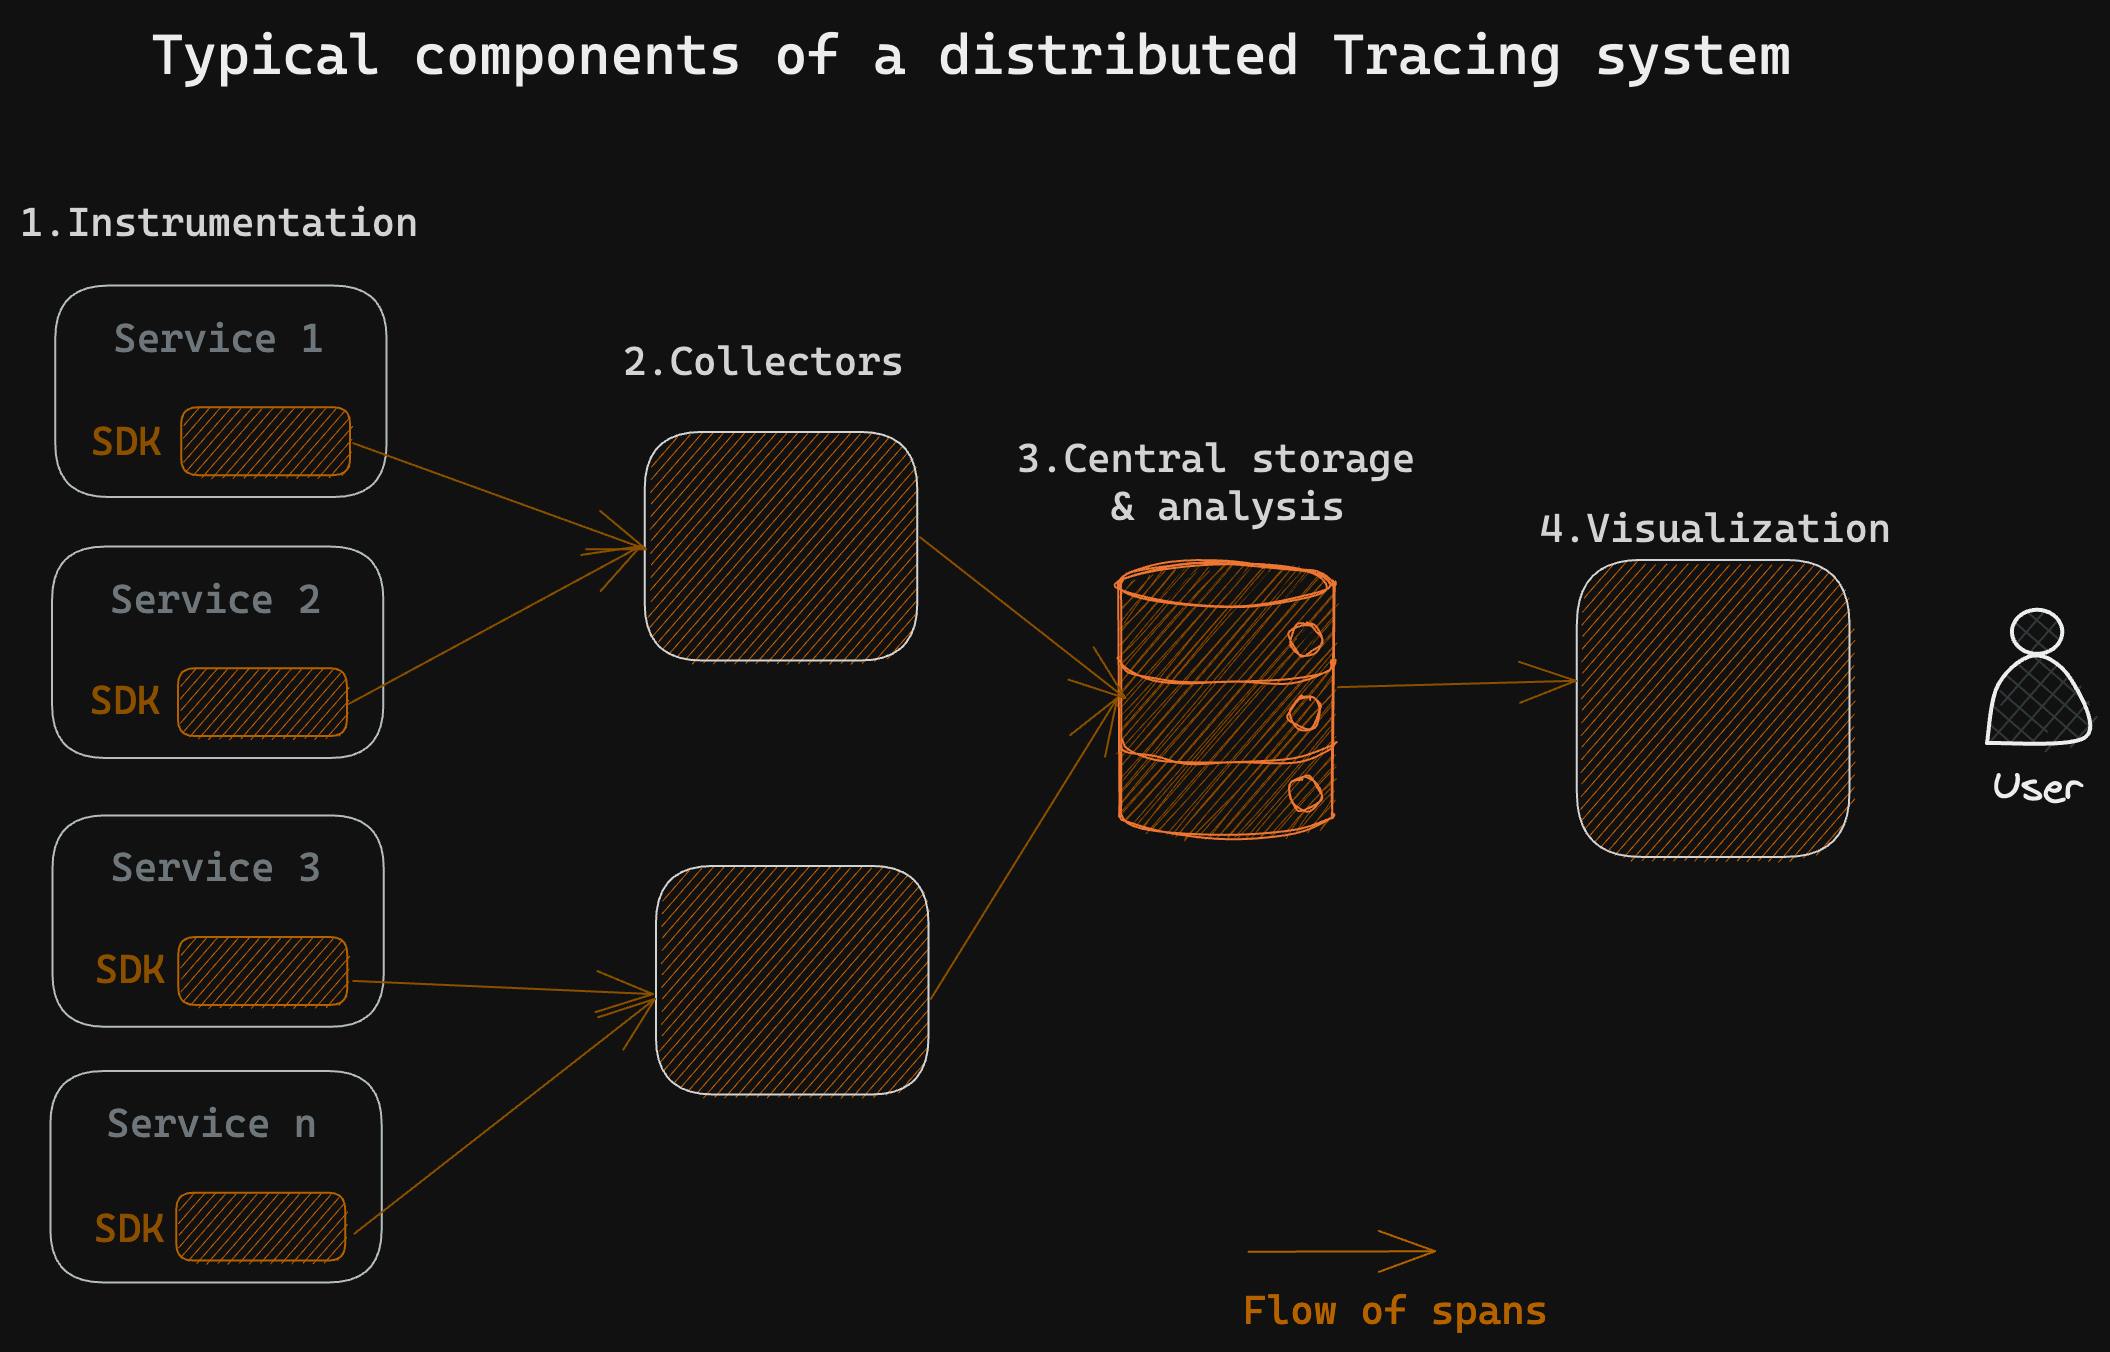 Components of a tracing system